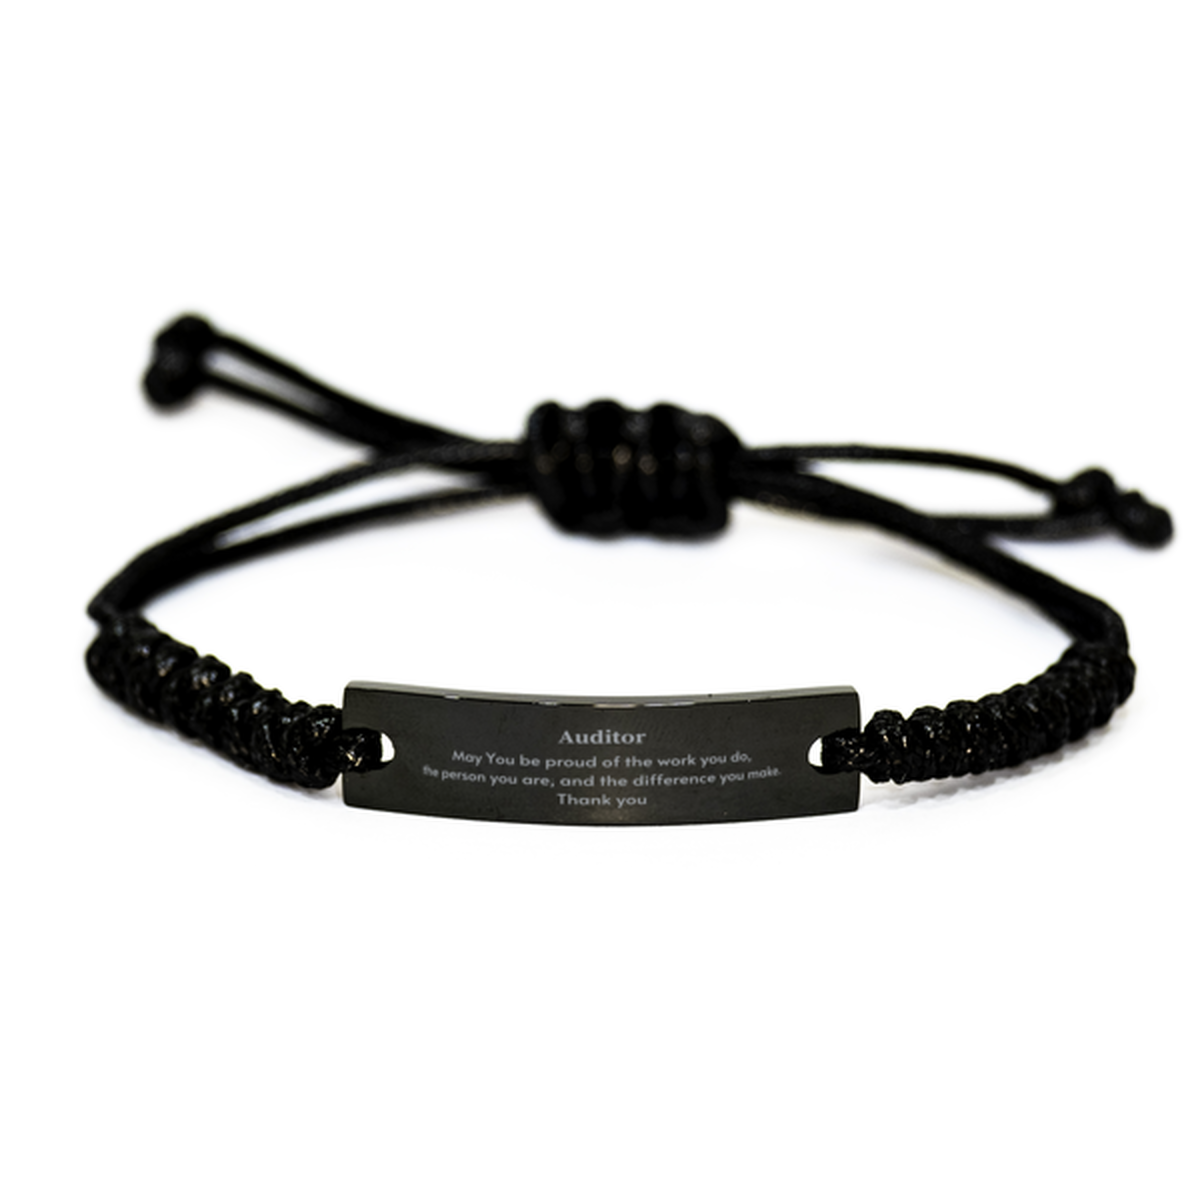 Heartwarming Black Rope Bracelet Retirement Coworkers Gifts for Auditor, Auditor May You be proud of the work you do, the person you are Gifts for Boss Men Women Friends